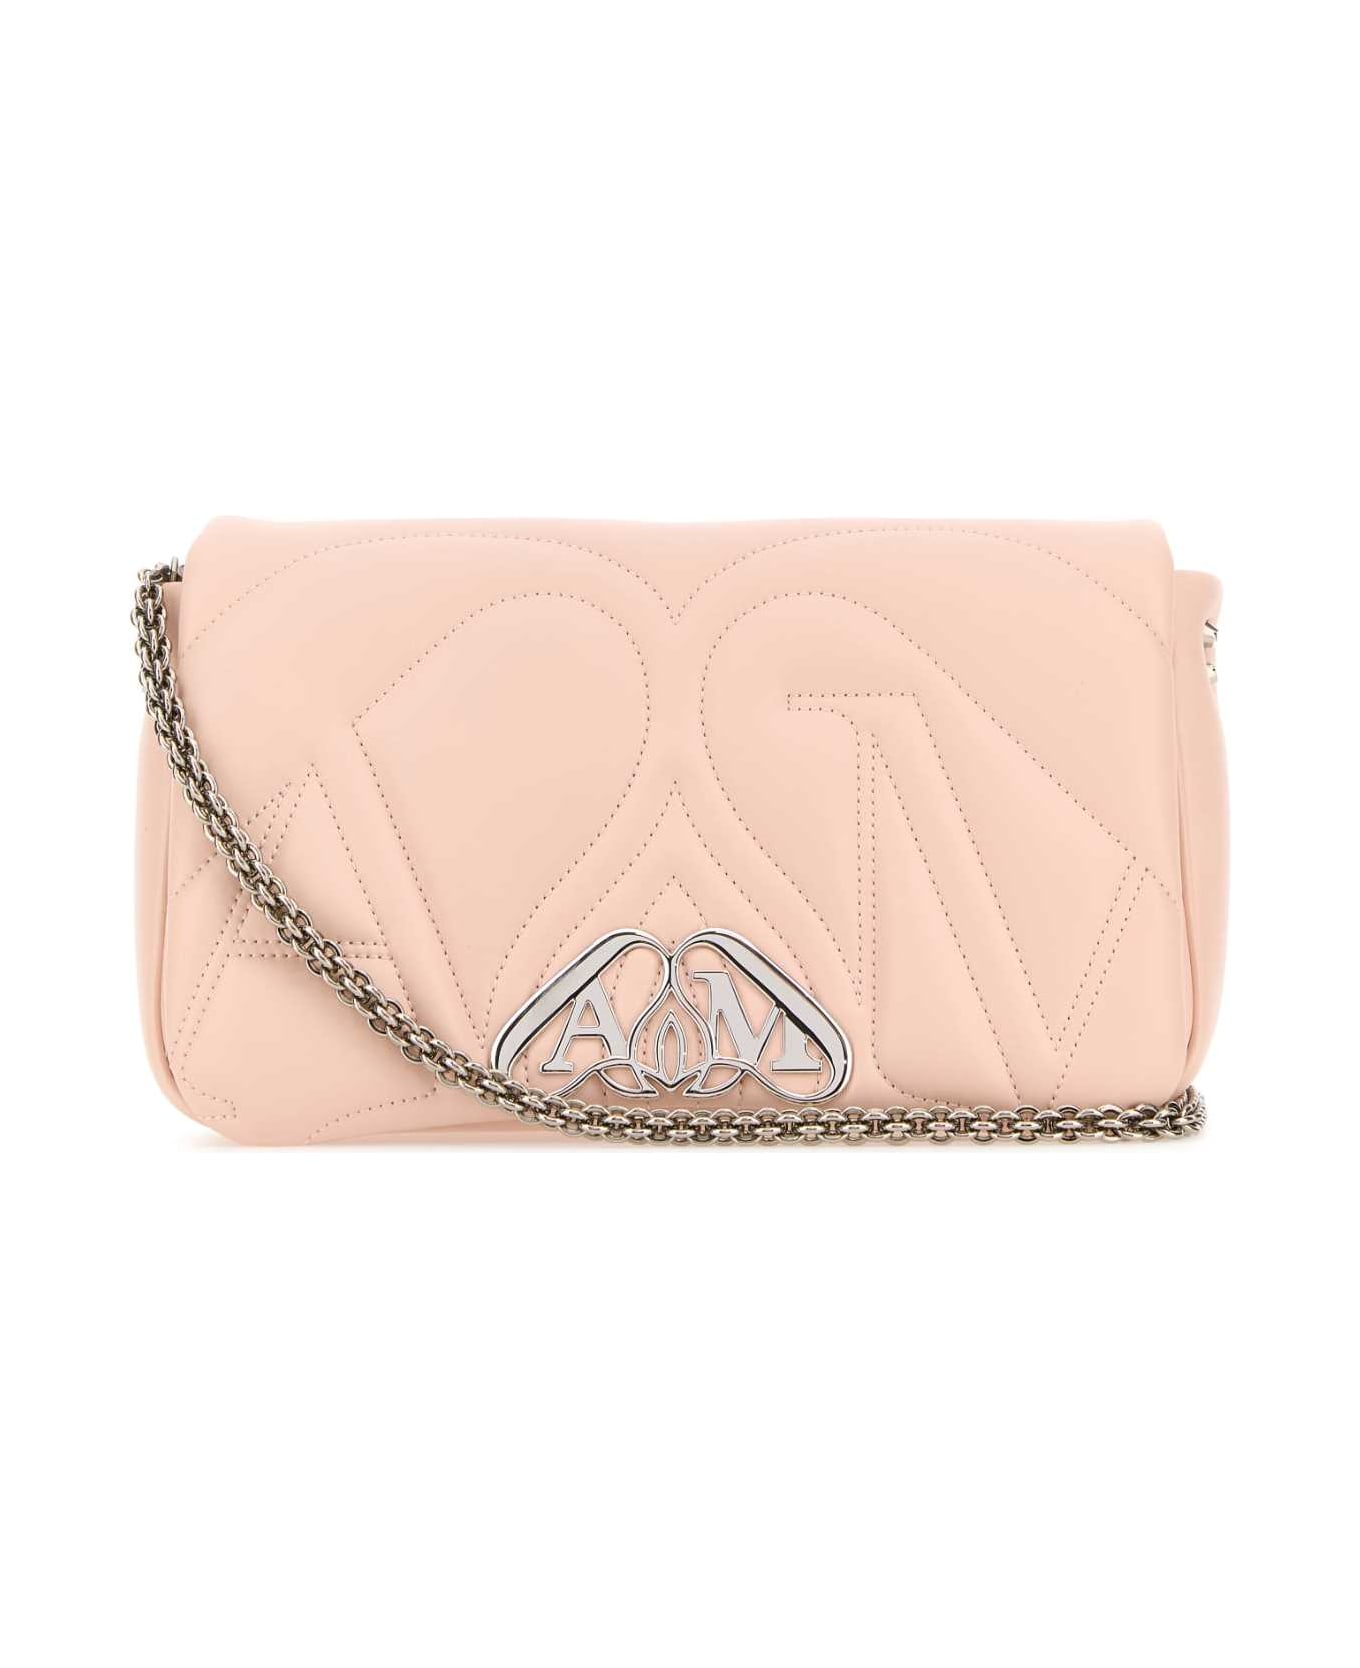 Alexander McQueen Pink Leather Small Seal Shoulder Bag - CLAY ショルダーバッグ